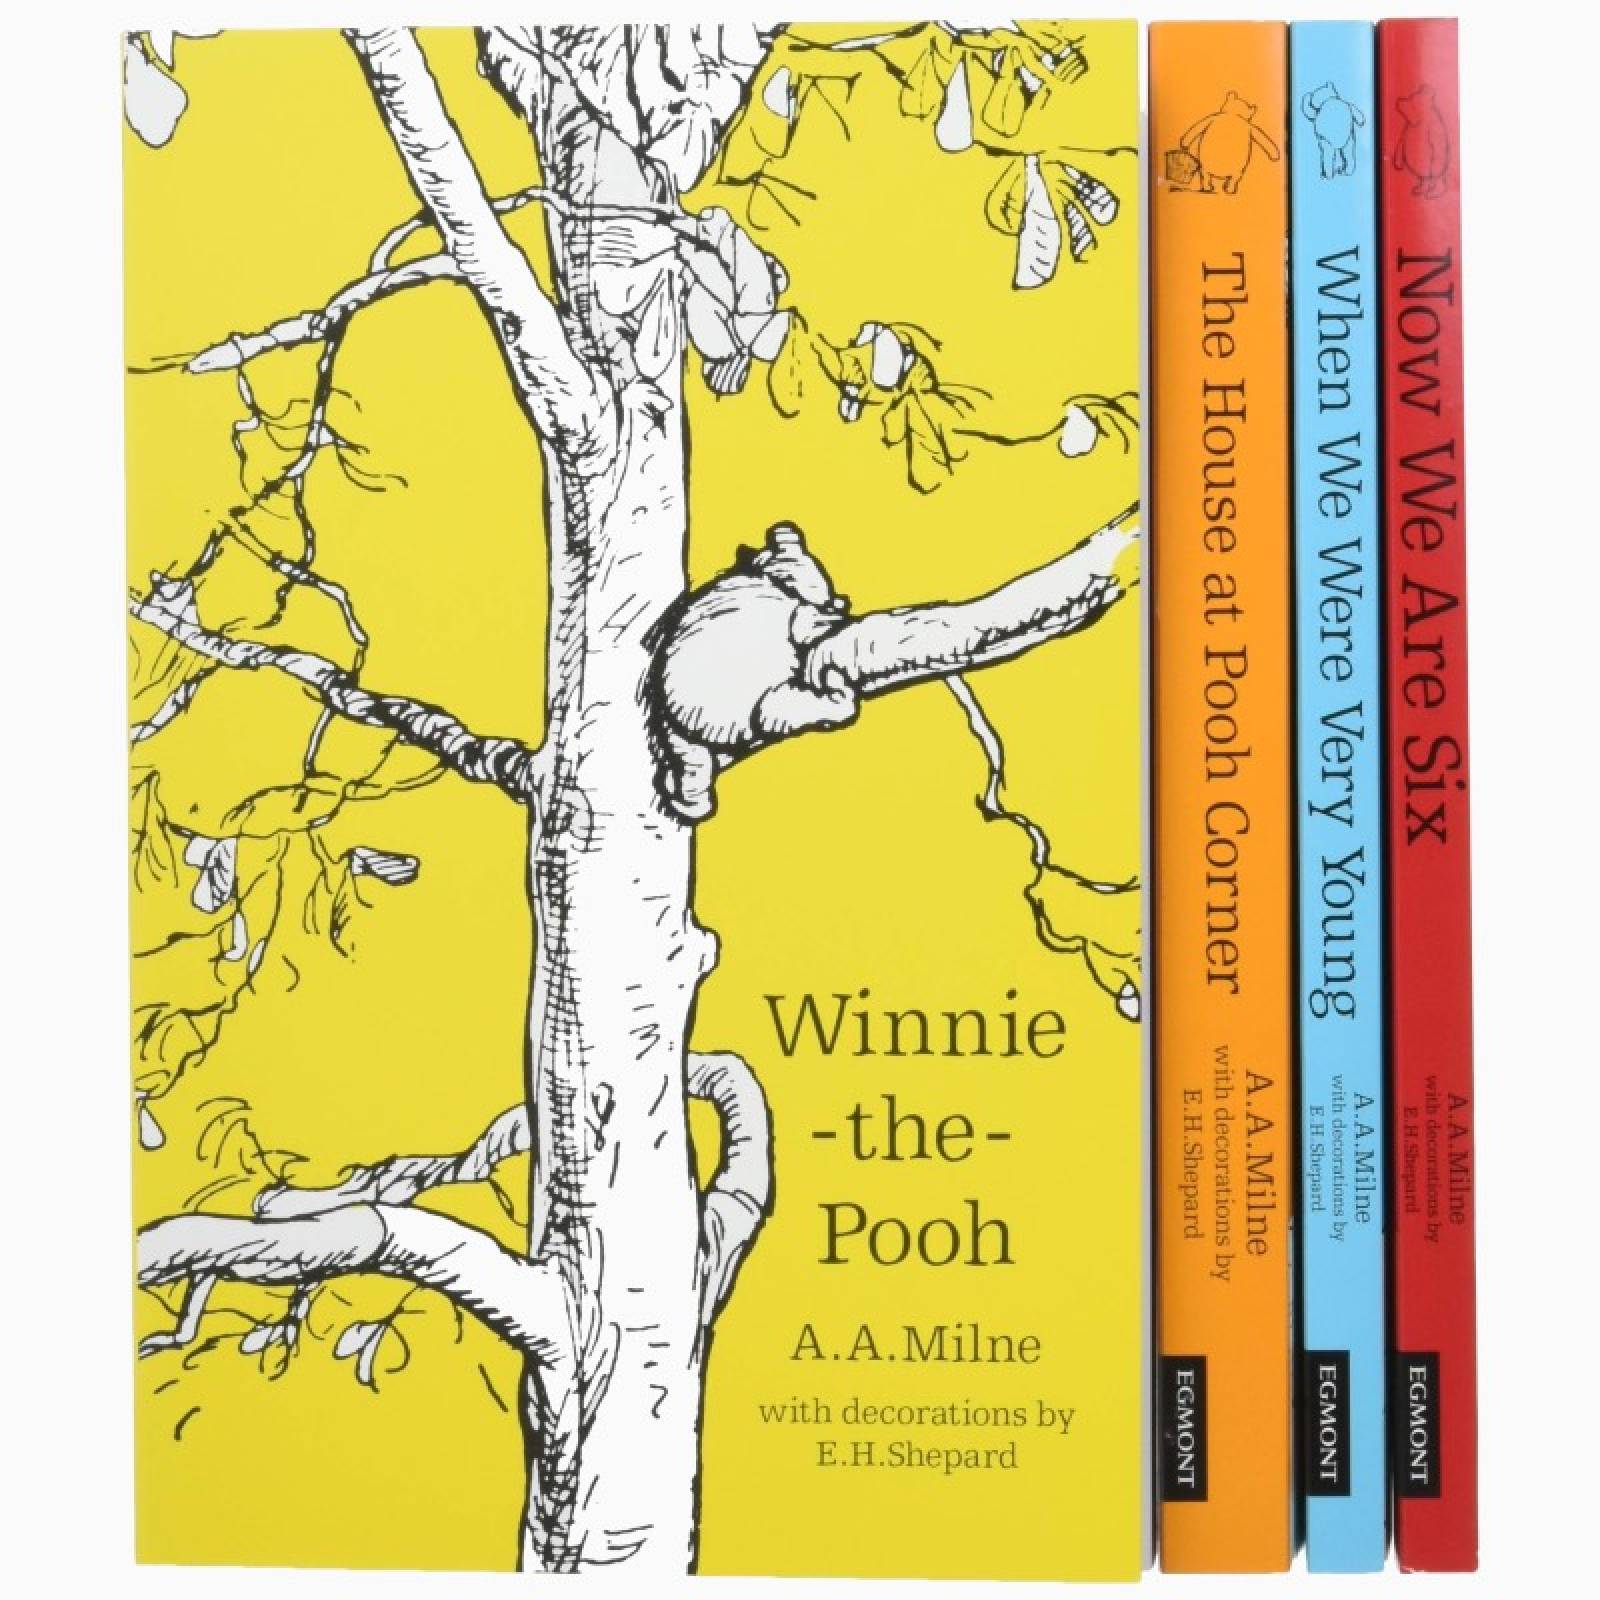 Winnie the Pooh Classic Collection - 4 Book Slipcase Set thumbnails